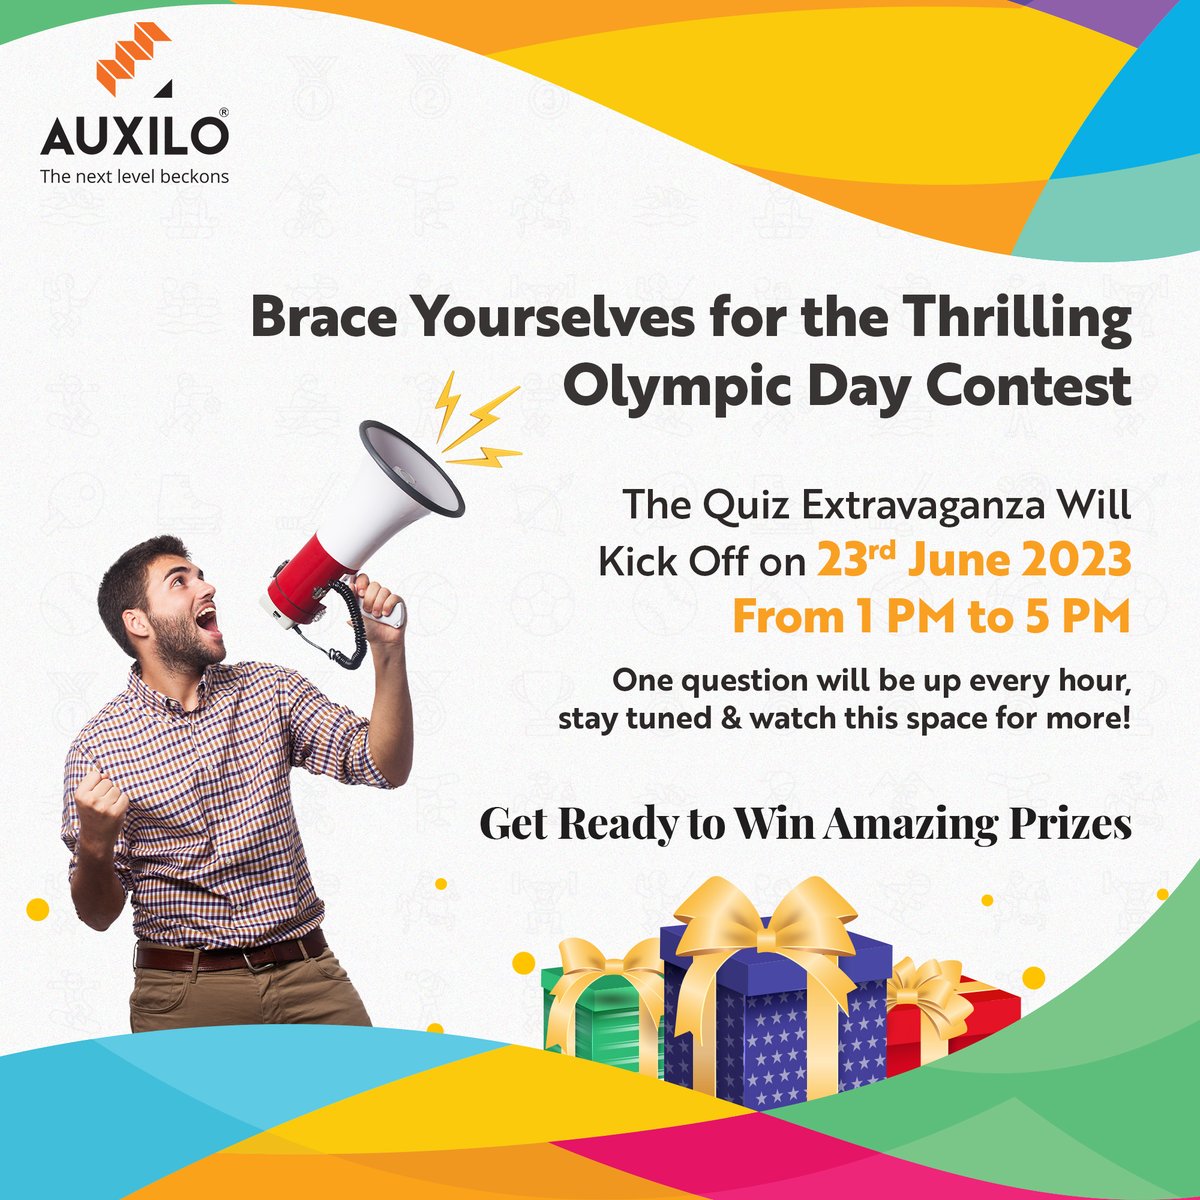 Attention all quiz enthusiasts! Join us for the ultimate Olympic Day Quiz Contest on June 23rd, from 1 PM to 5 PM. Remember to check the caption for the rules to enter the thrilling quiz.
#OlympicDayQuiz #SportsChallenge #ContestAlert #QuizContest #InternationalOlympicDay #Auxilo